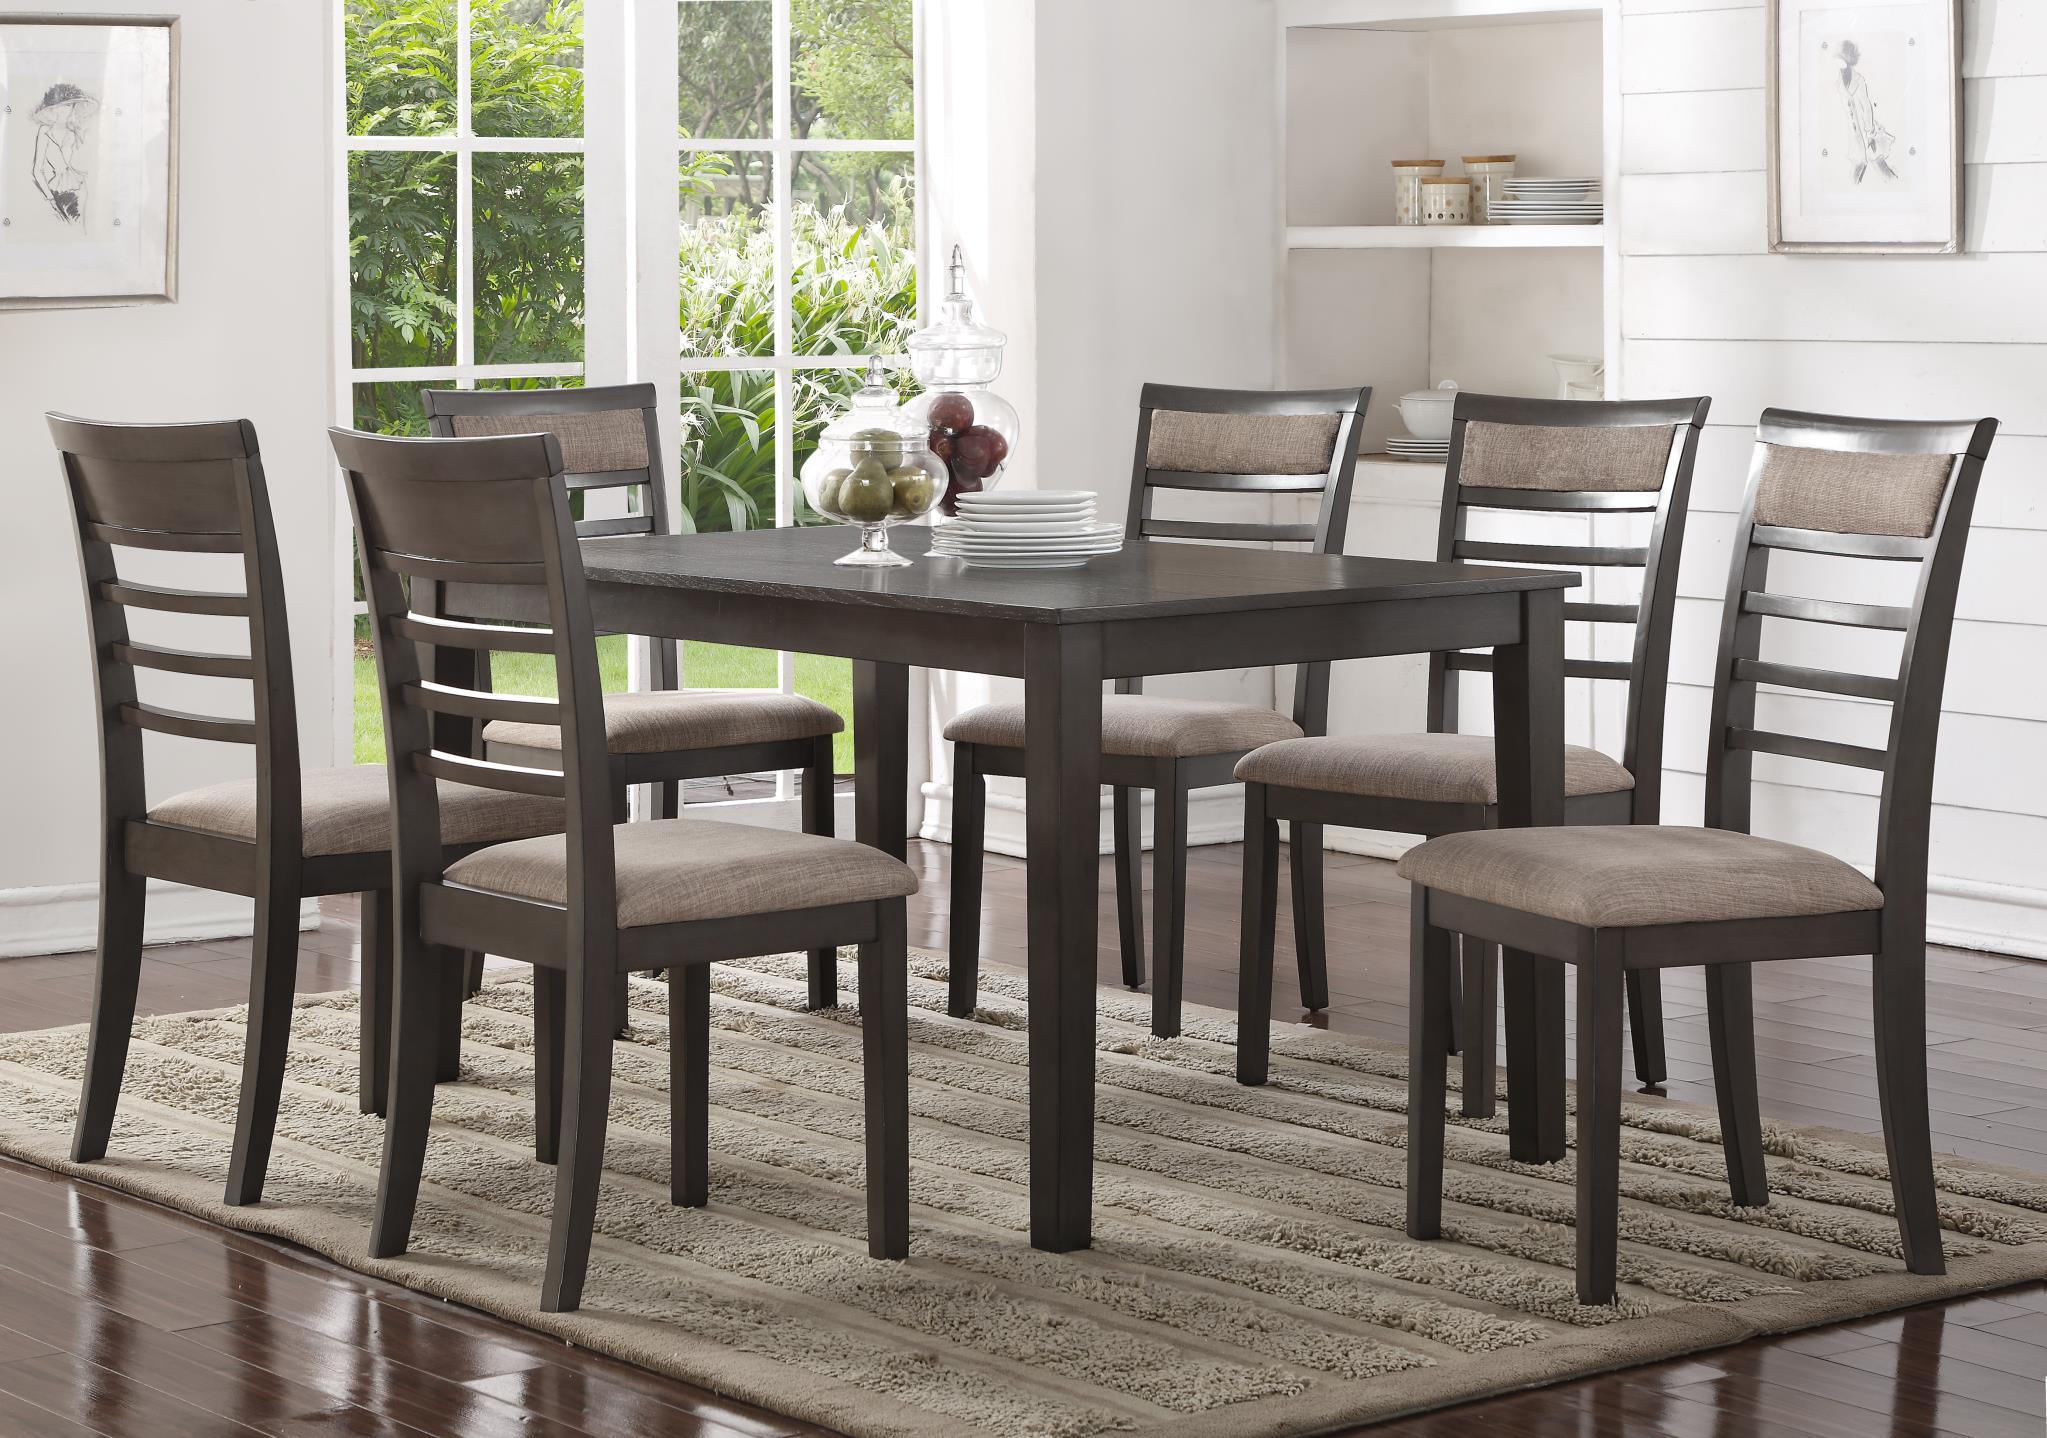 Contemporary, Transitional, Farmhouse Dining Room Set GLENDALE 5763-500 5763-500 in Brown Fabric